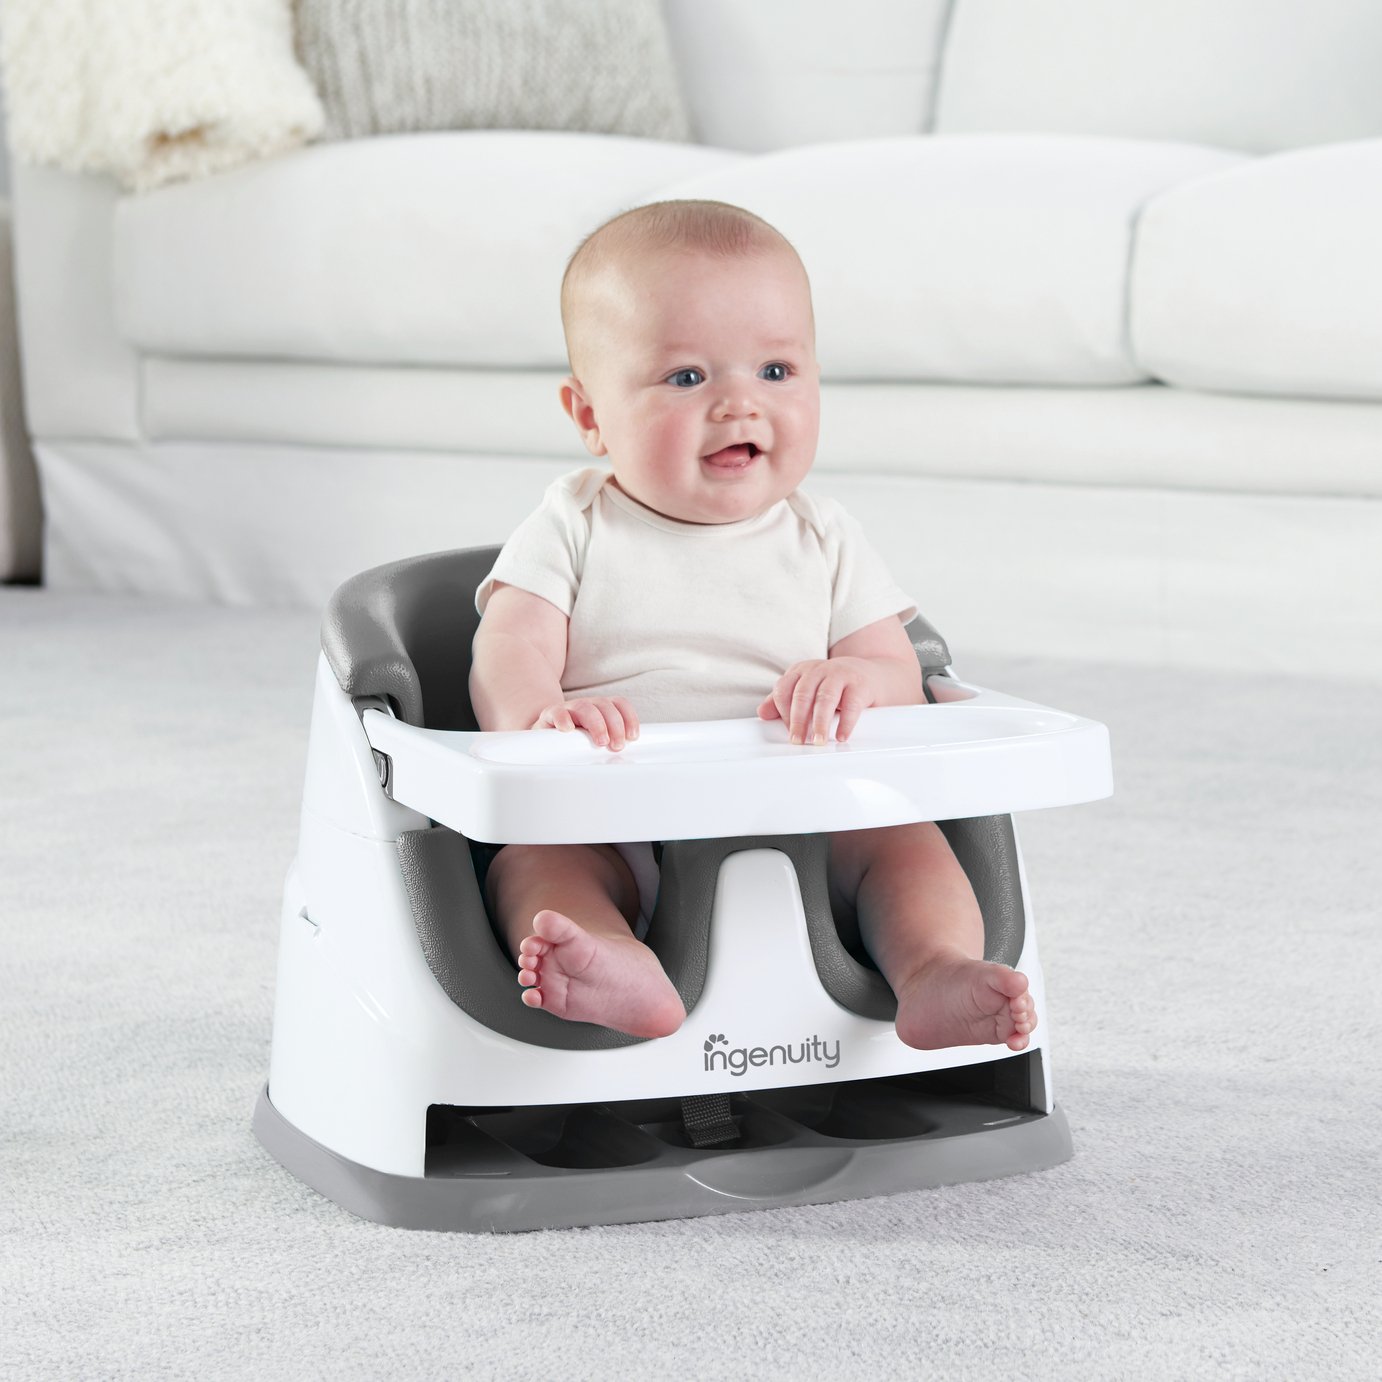 Ingenuity Baby Base Smartclean 2-In-1 Toddler Booster Seat Review